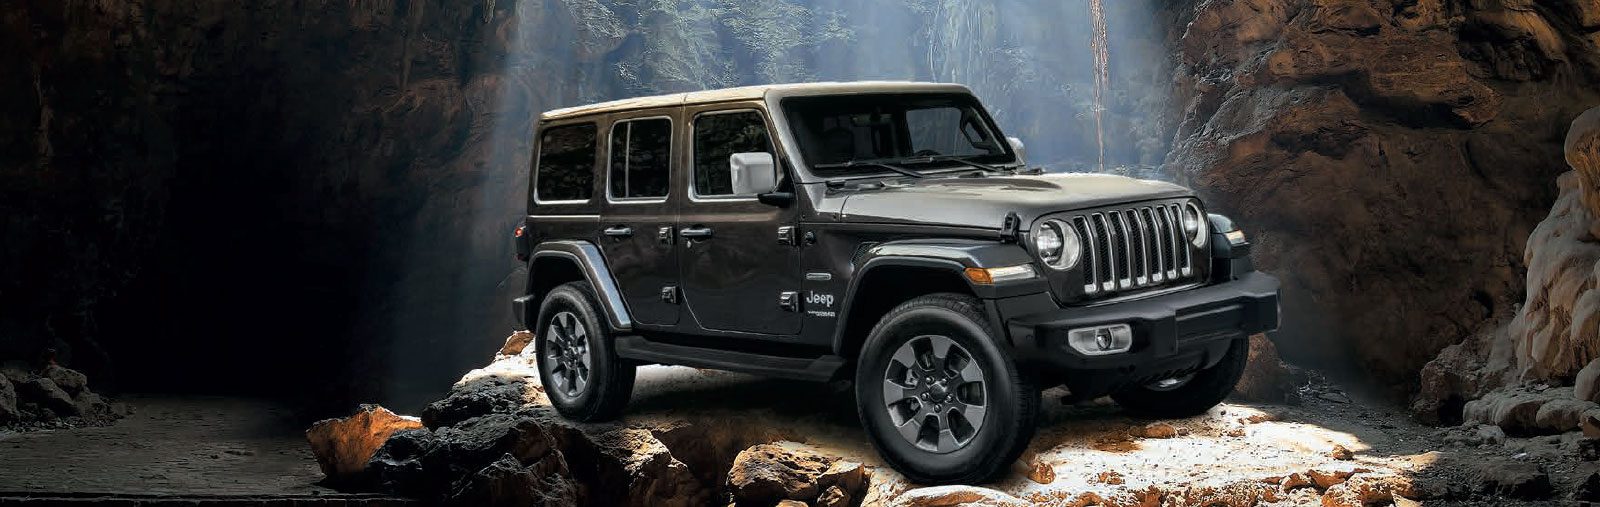 Jeep Wrangler Trail Rated